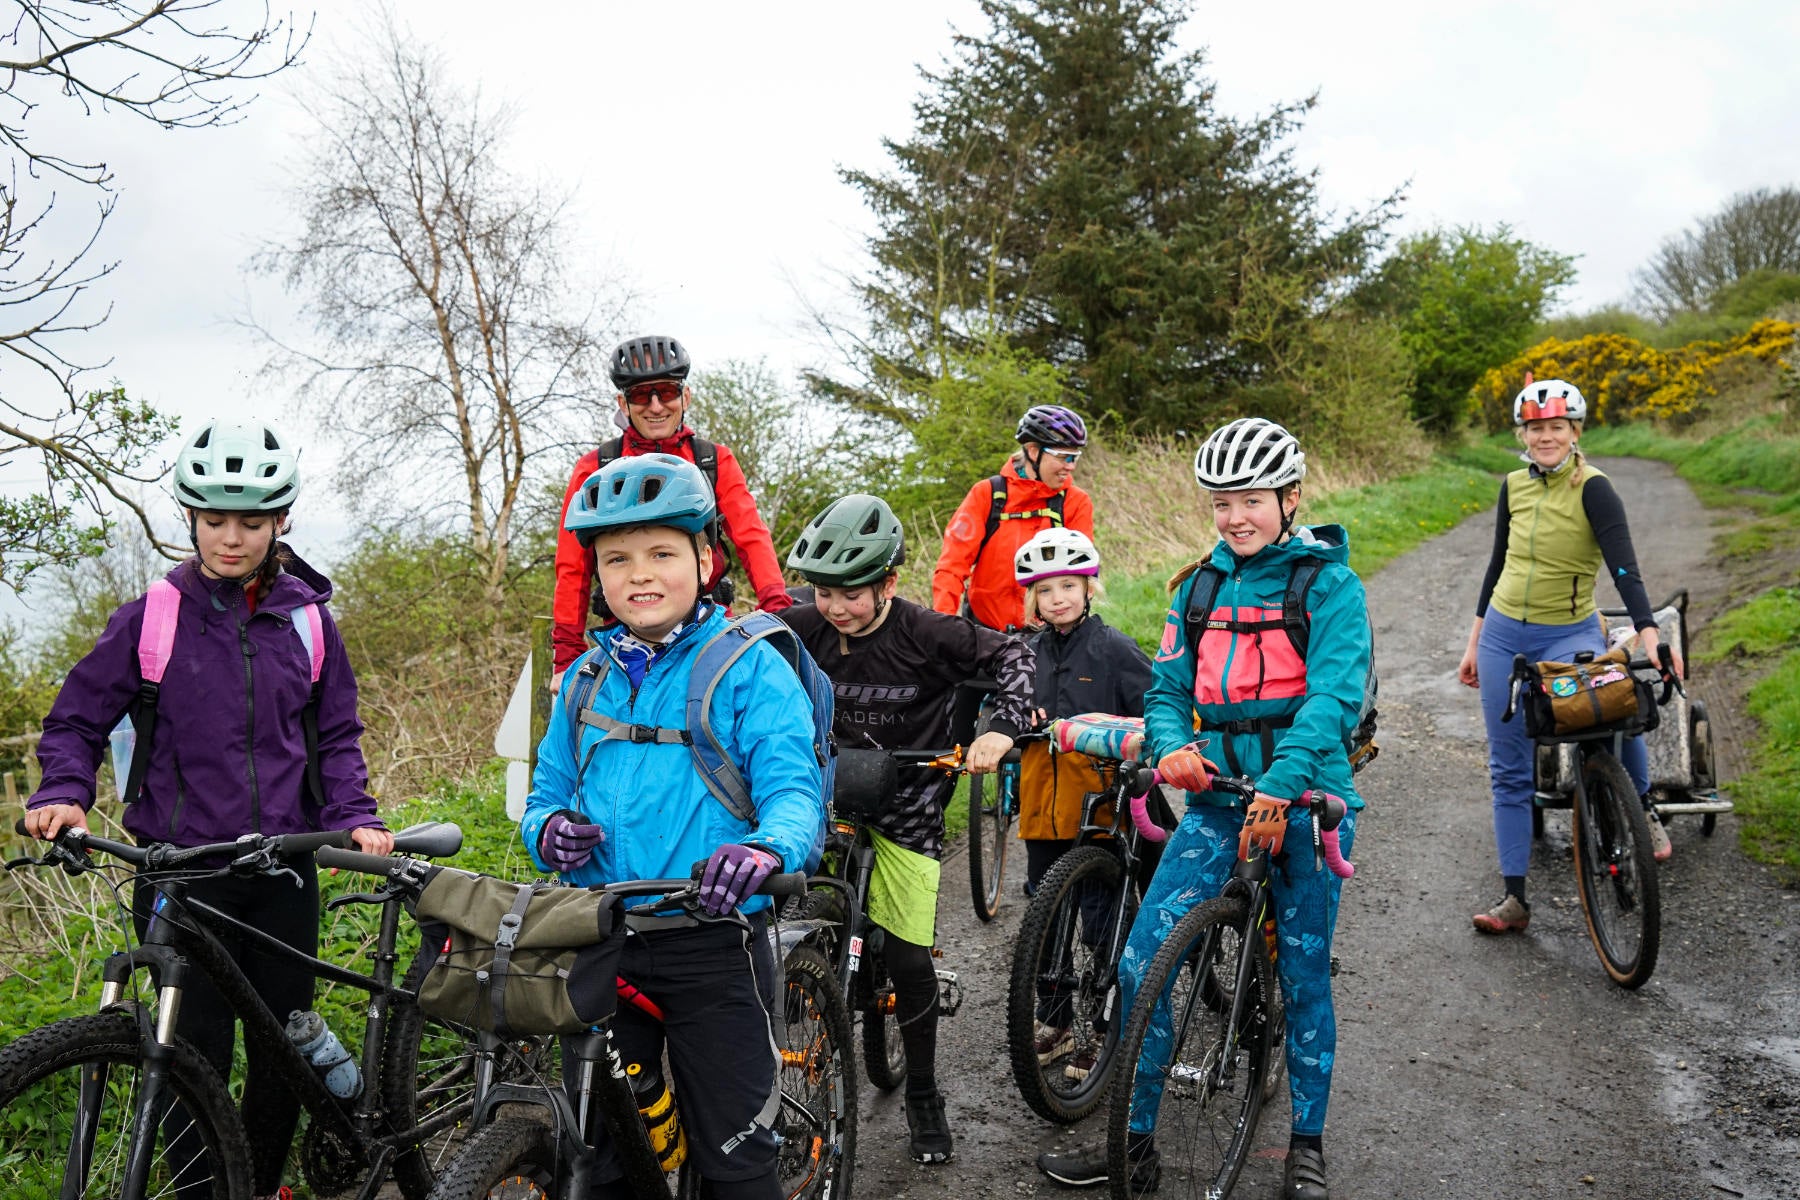 Easter family cycle touring on the Yorkshire Coastal Cycle Route